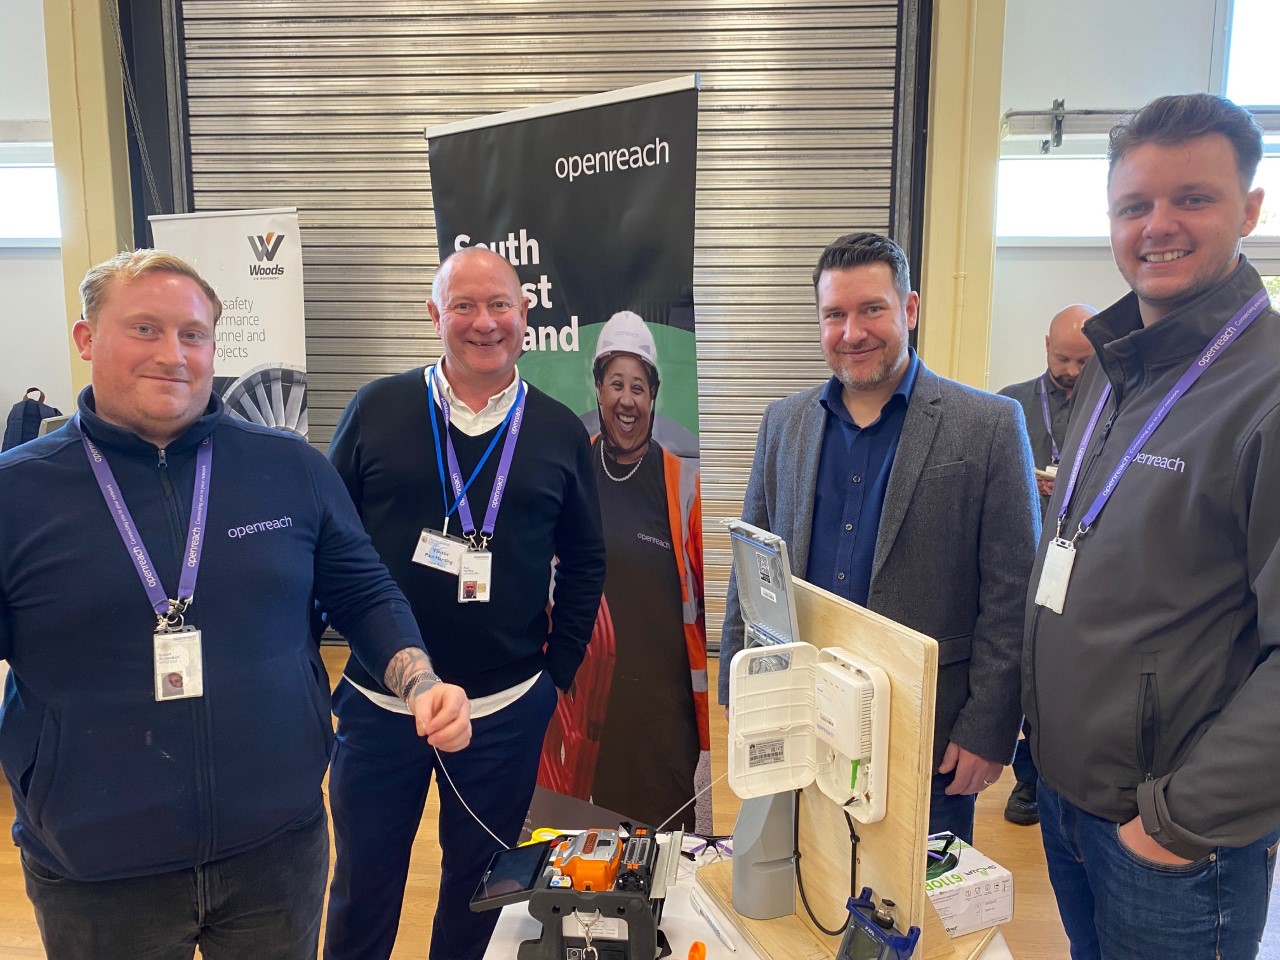 Exhibitors at My Smarter Essex: Step Into STEM included Openreach